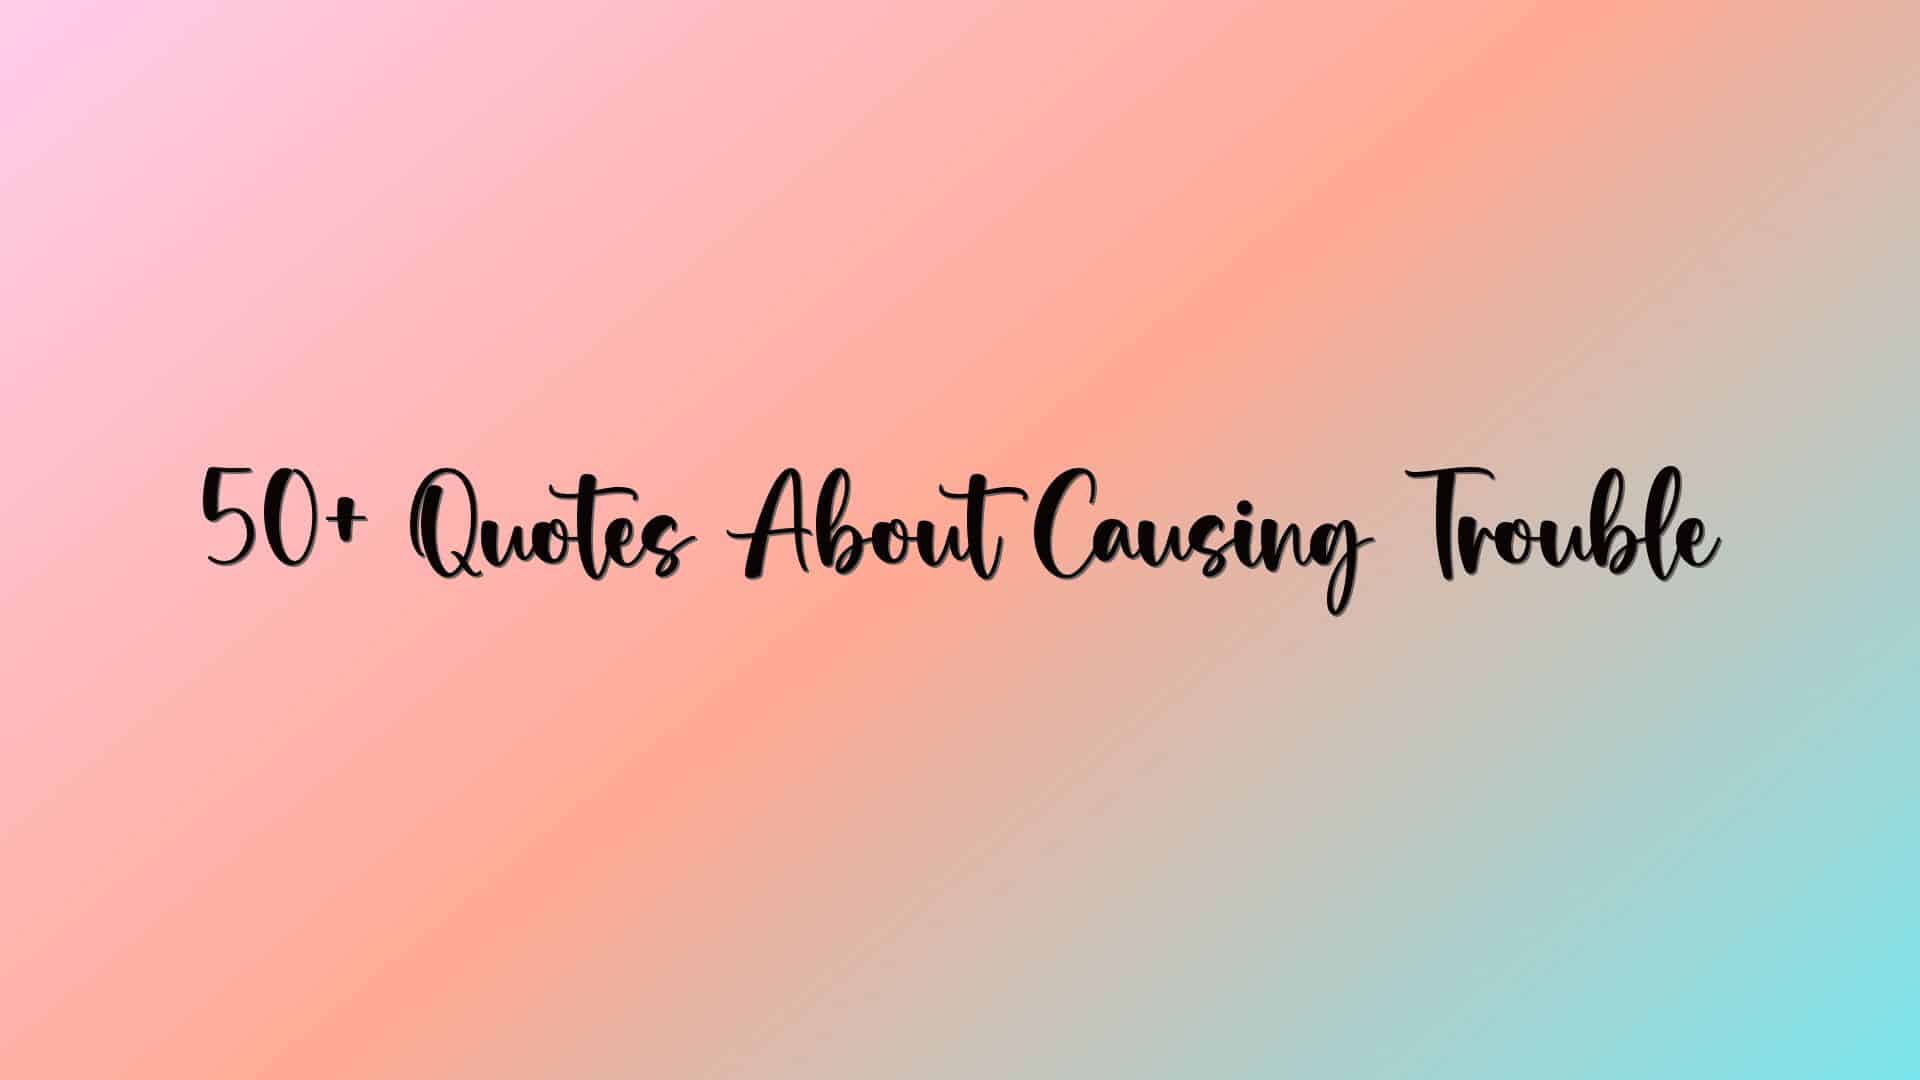 50+ Quotes About Causing Trouble